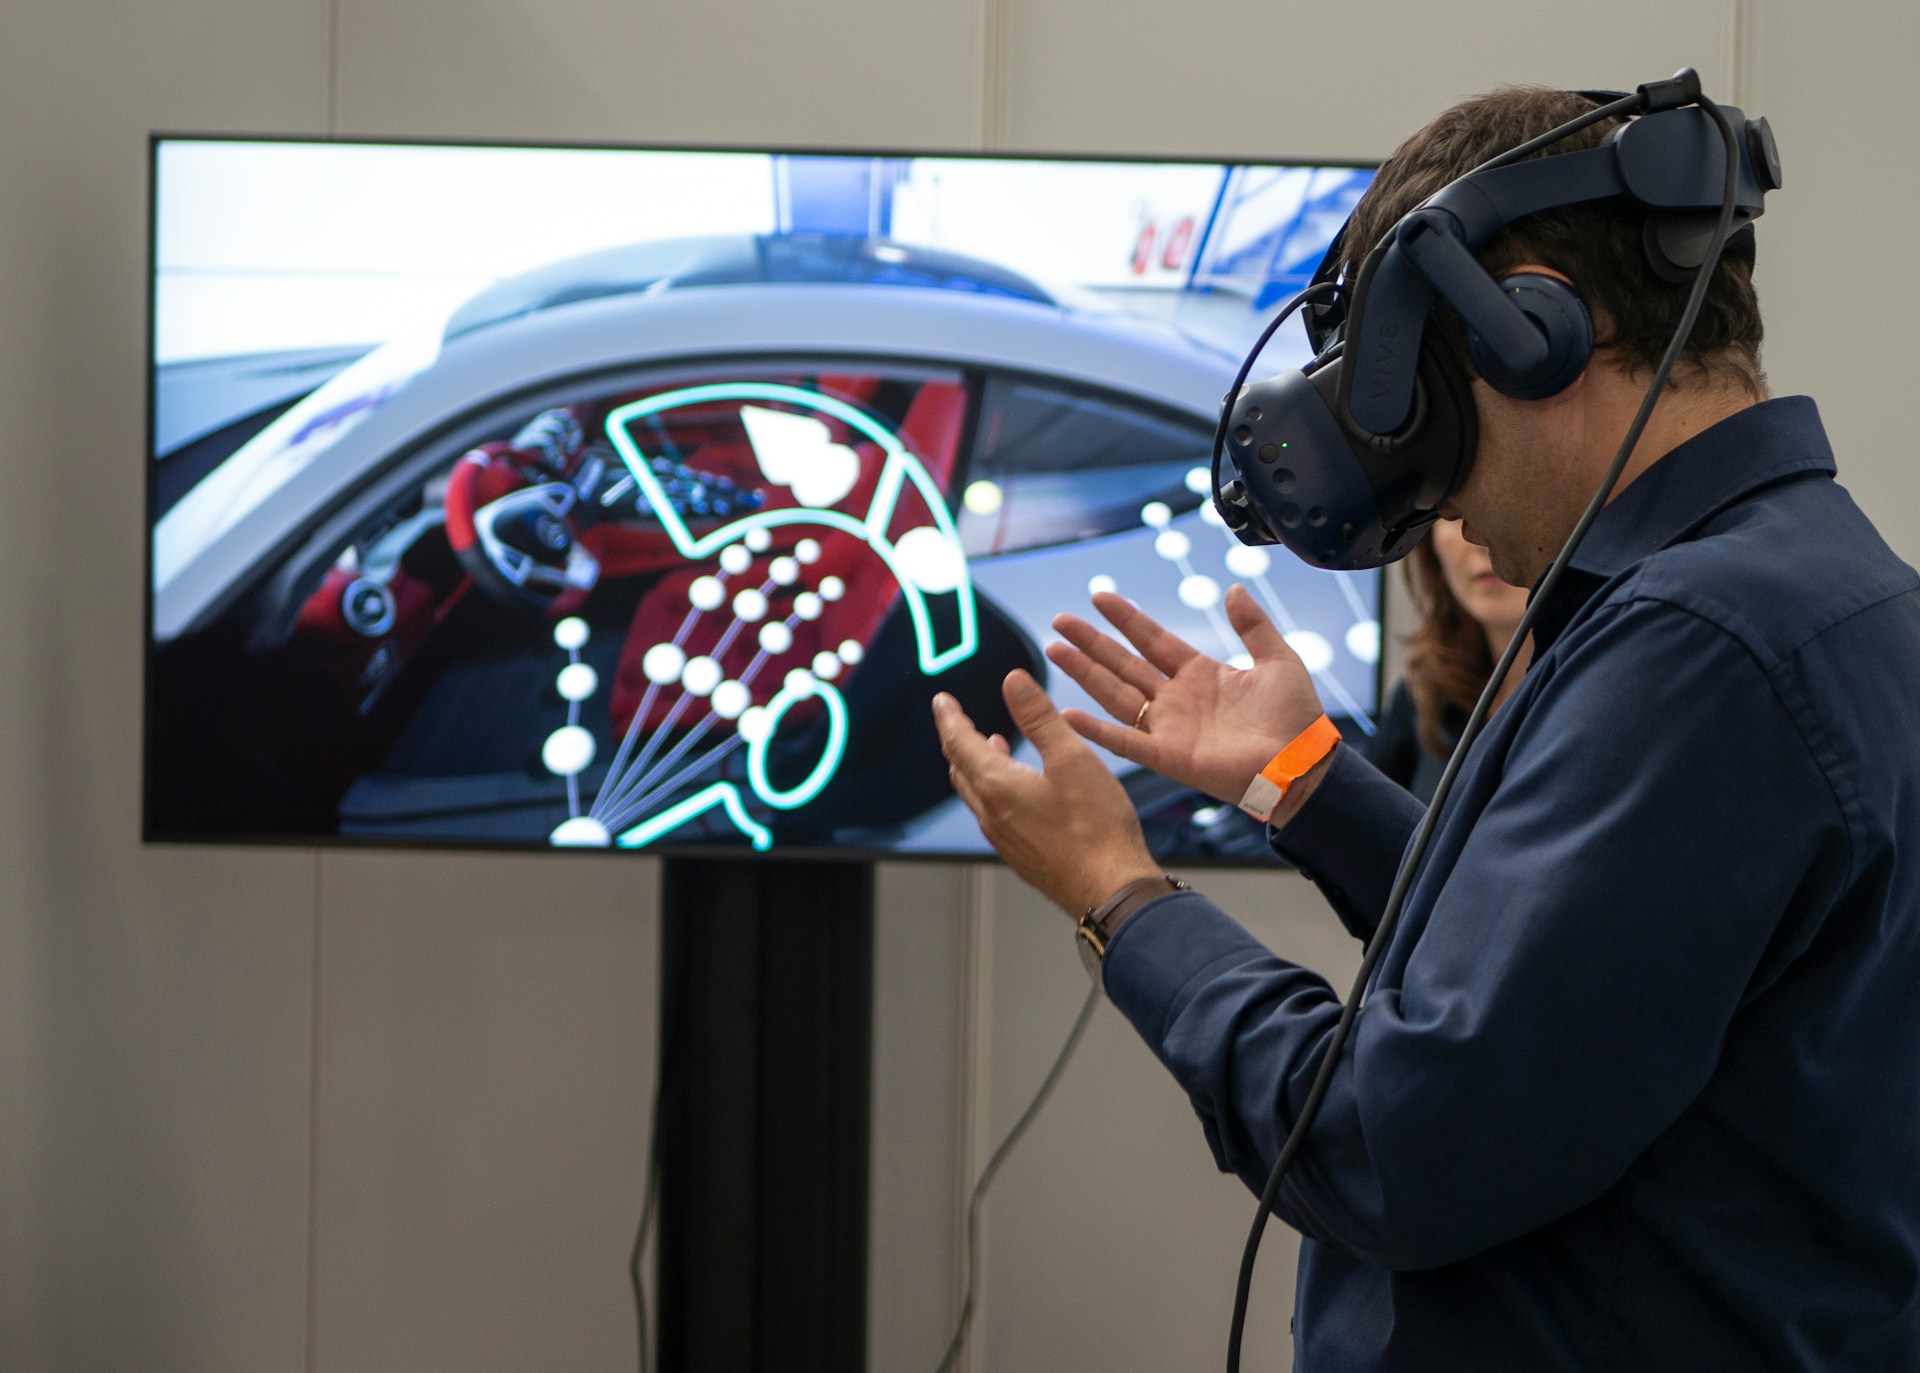 Man using a virtual reality headset with a car dashboard simulation displayed on the screen.